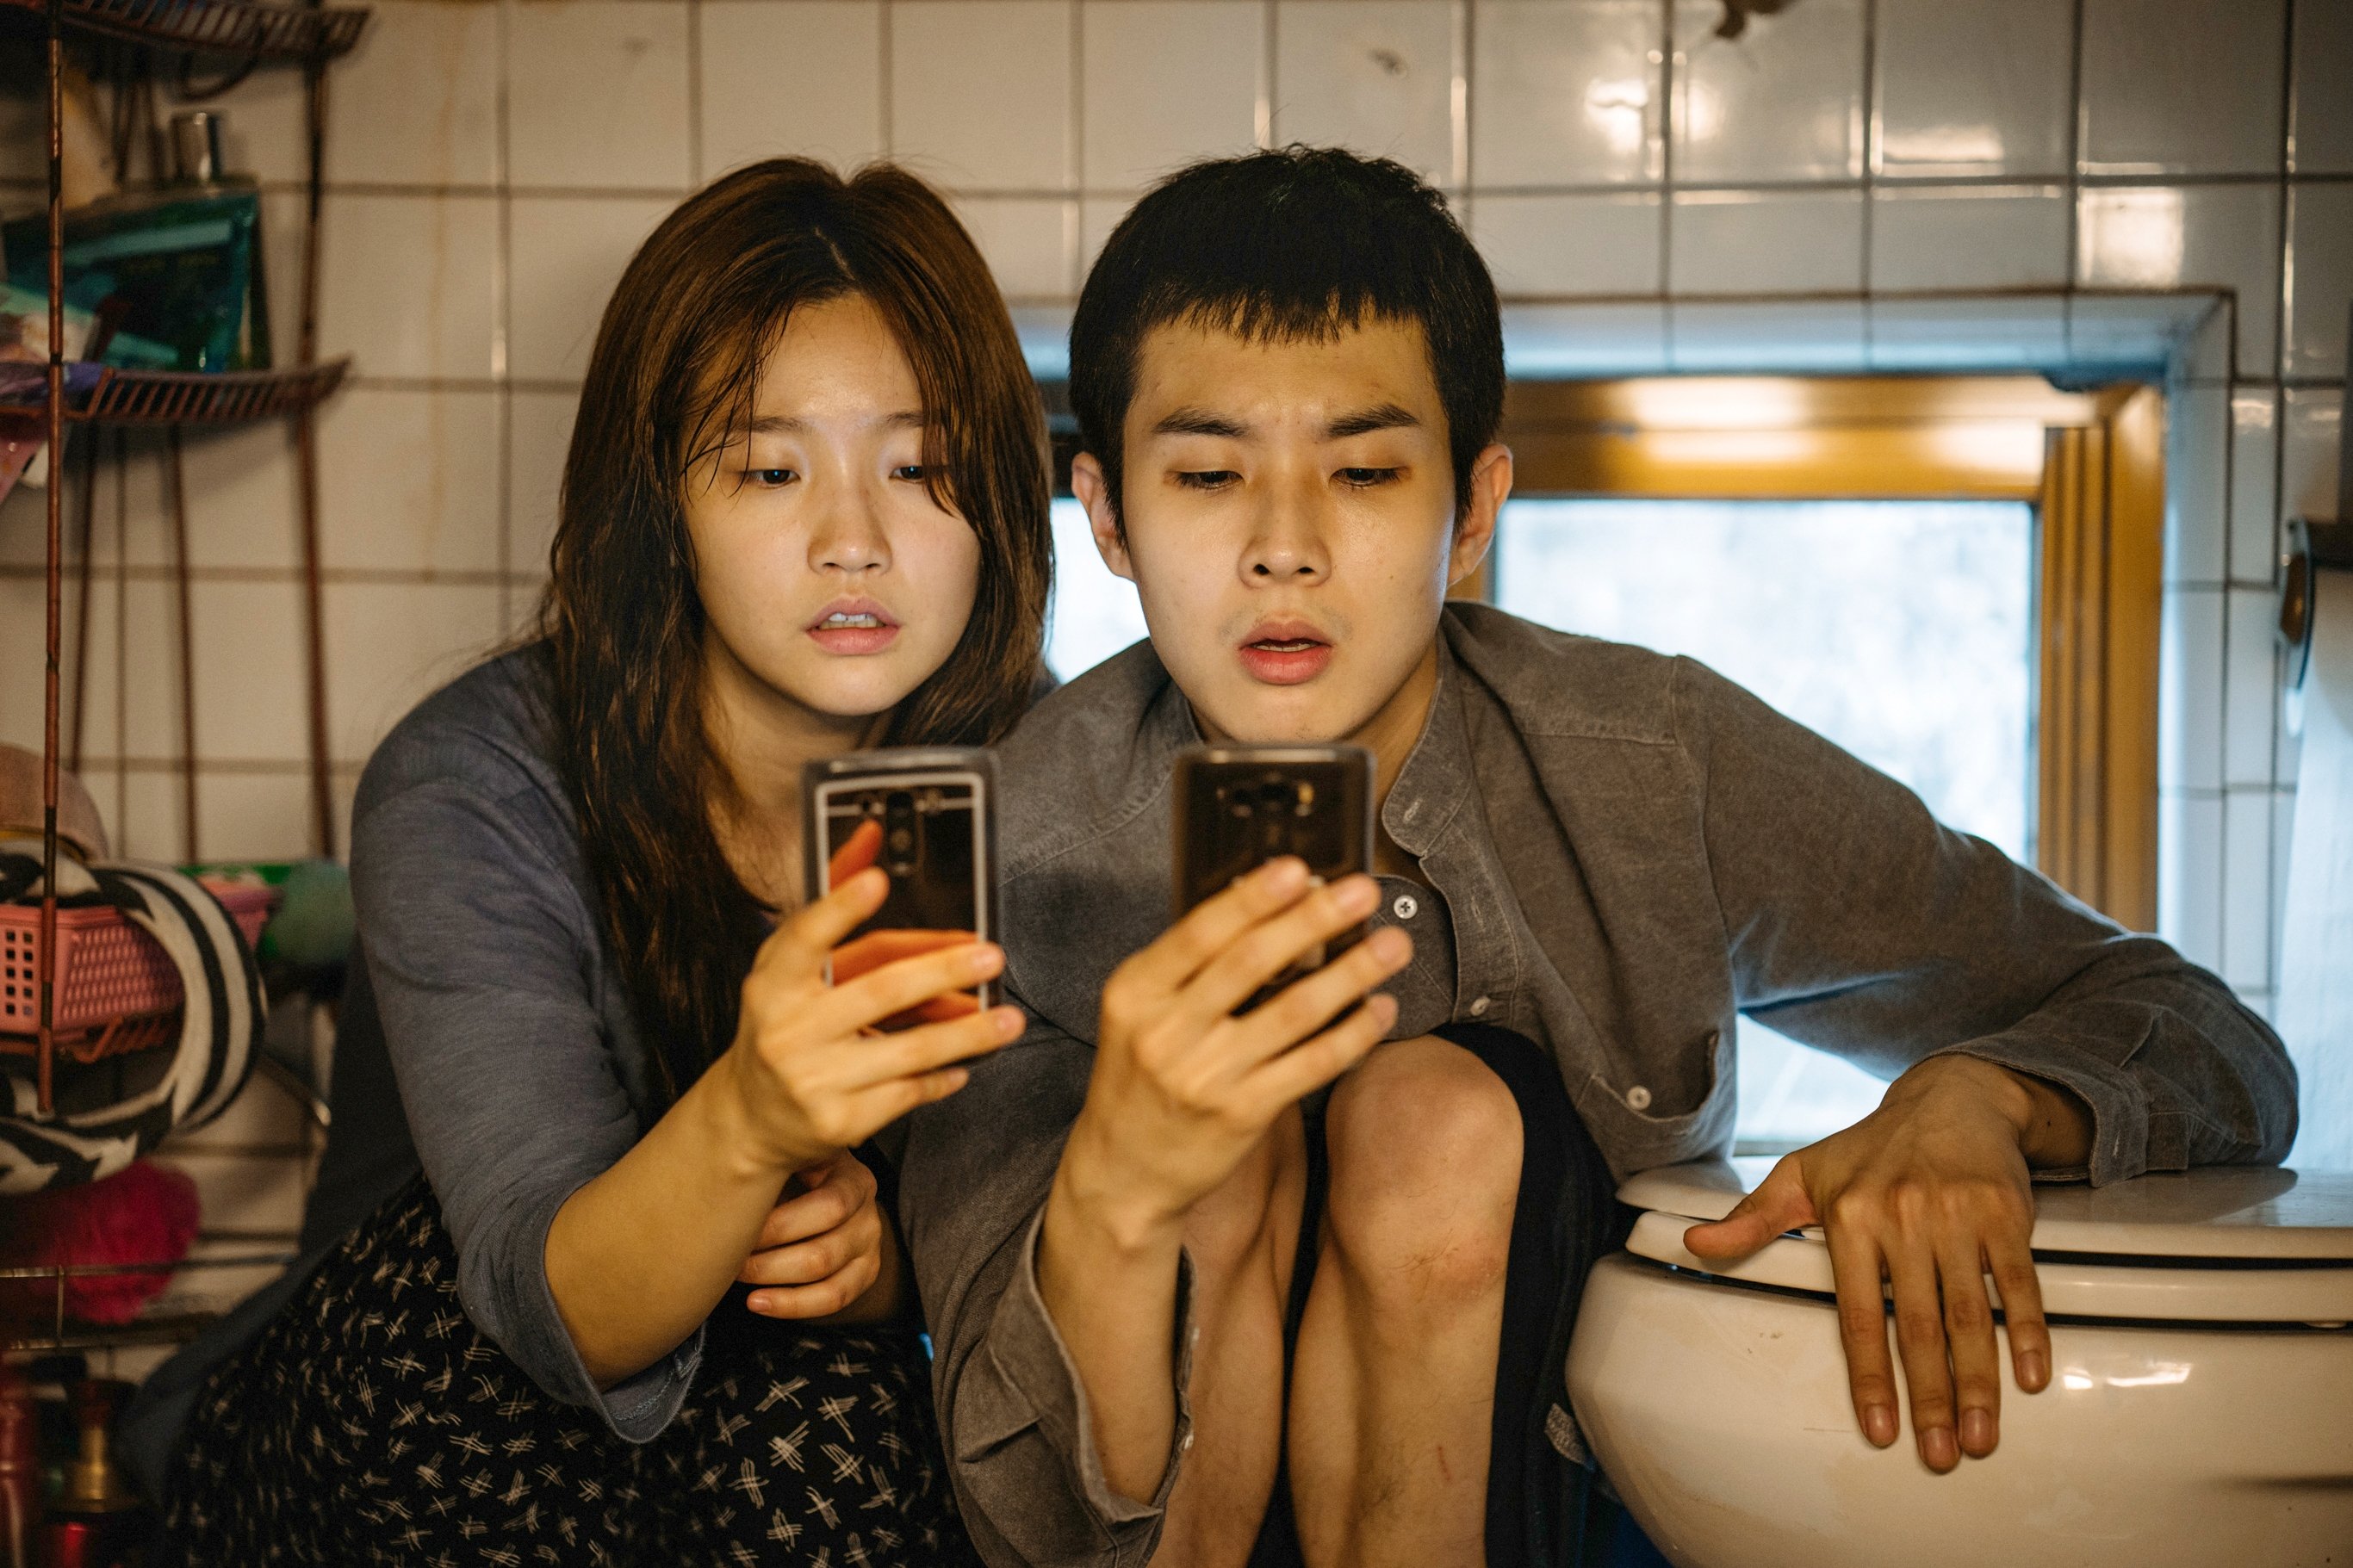 South Korean actors Park So Dam and Choi Woo in a scene from "Parasite". (DPA)